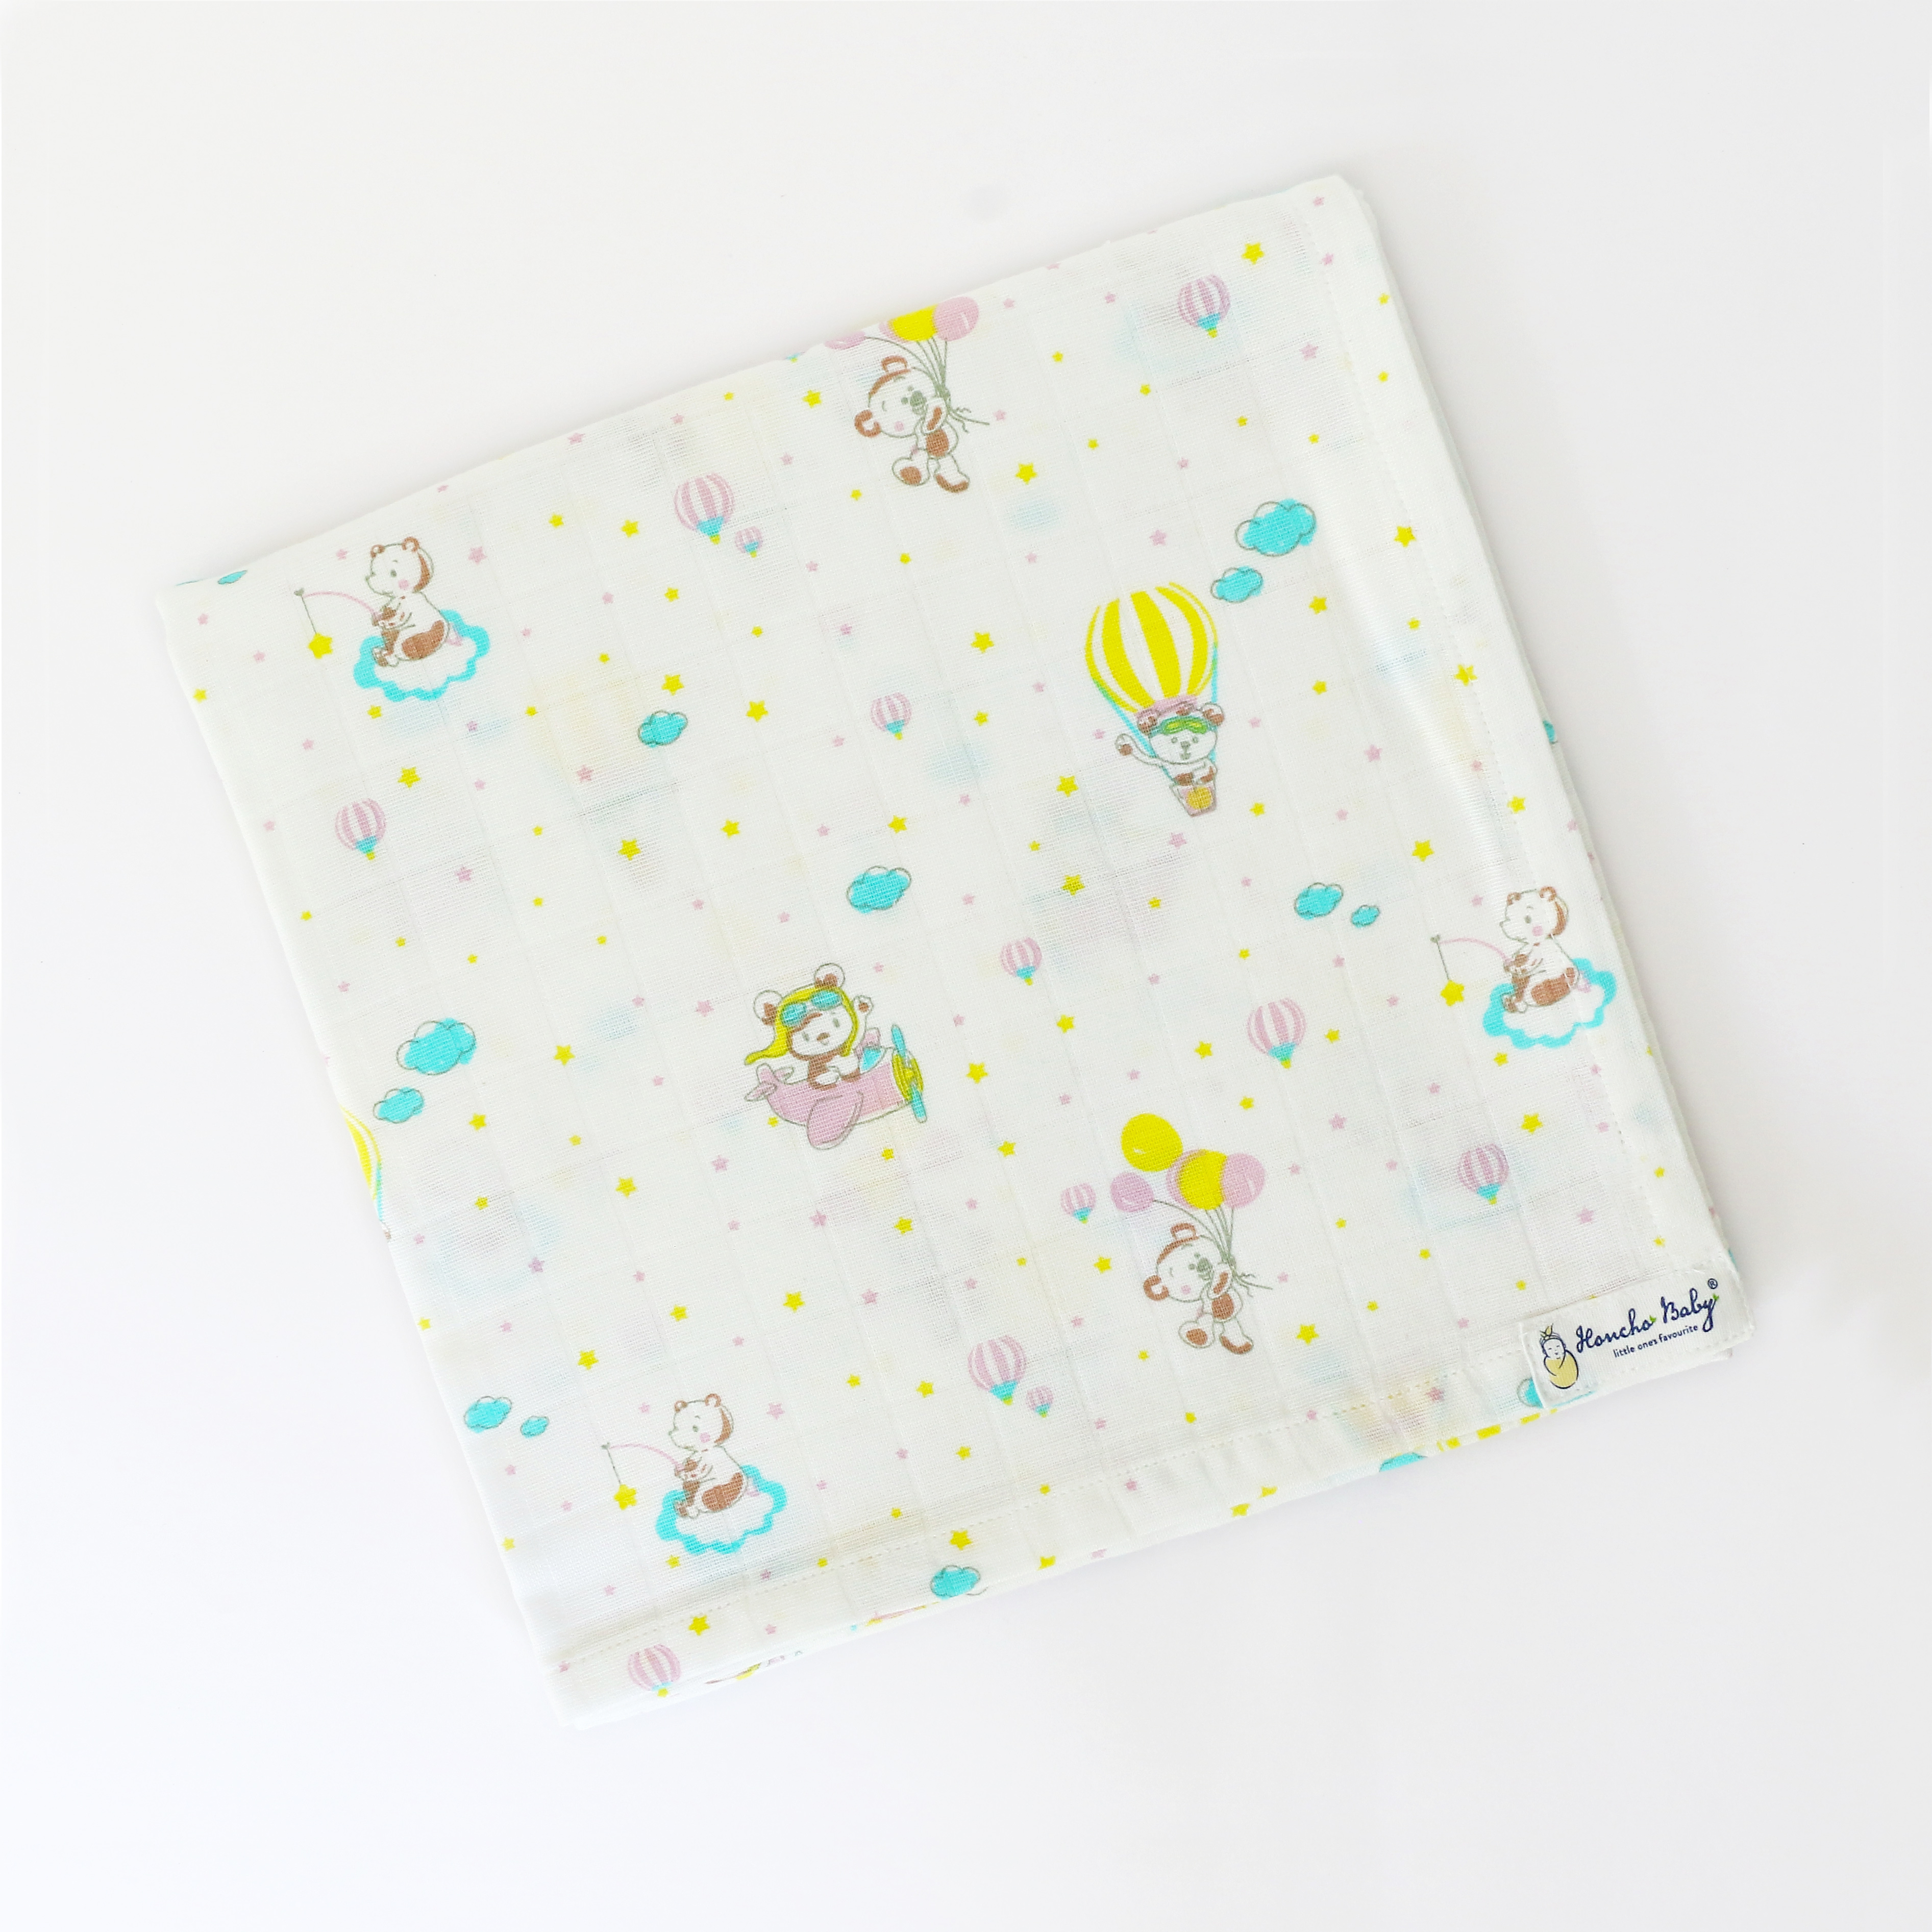 Teddy up above the Sky - Organic Cotton (double layer) Baby Muslin Swaddle/ Blanket - 110 X 110 cms